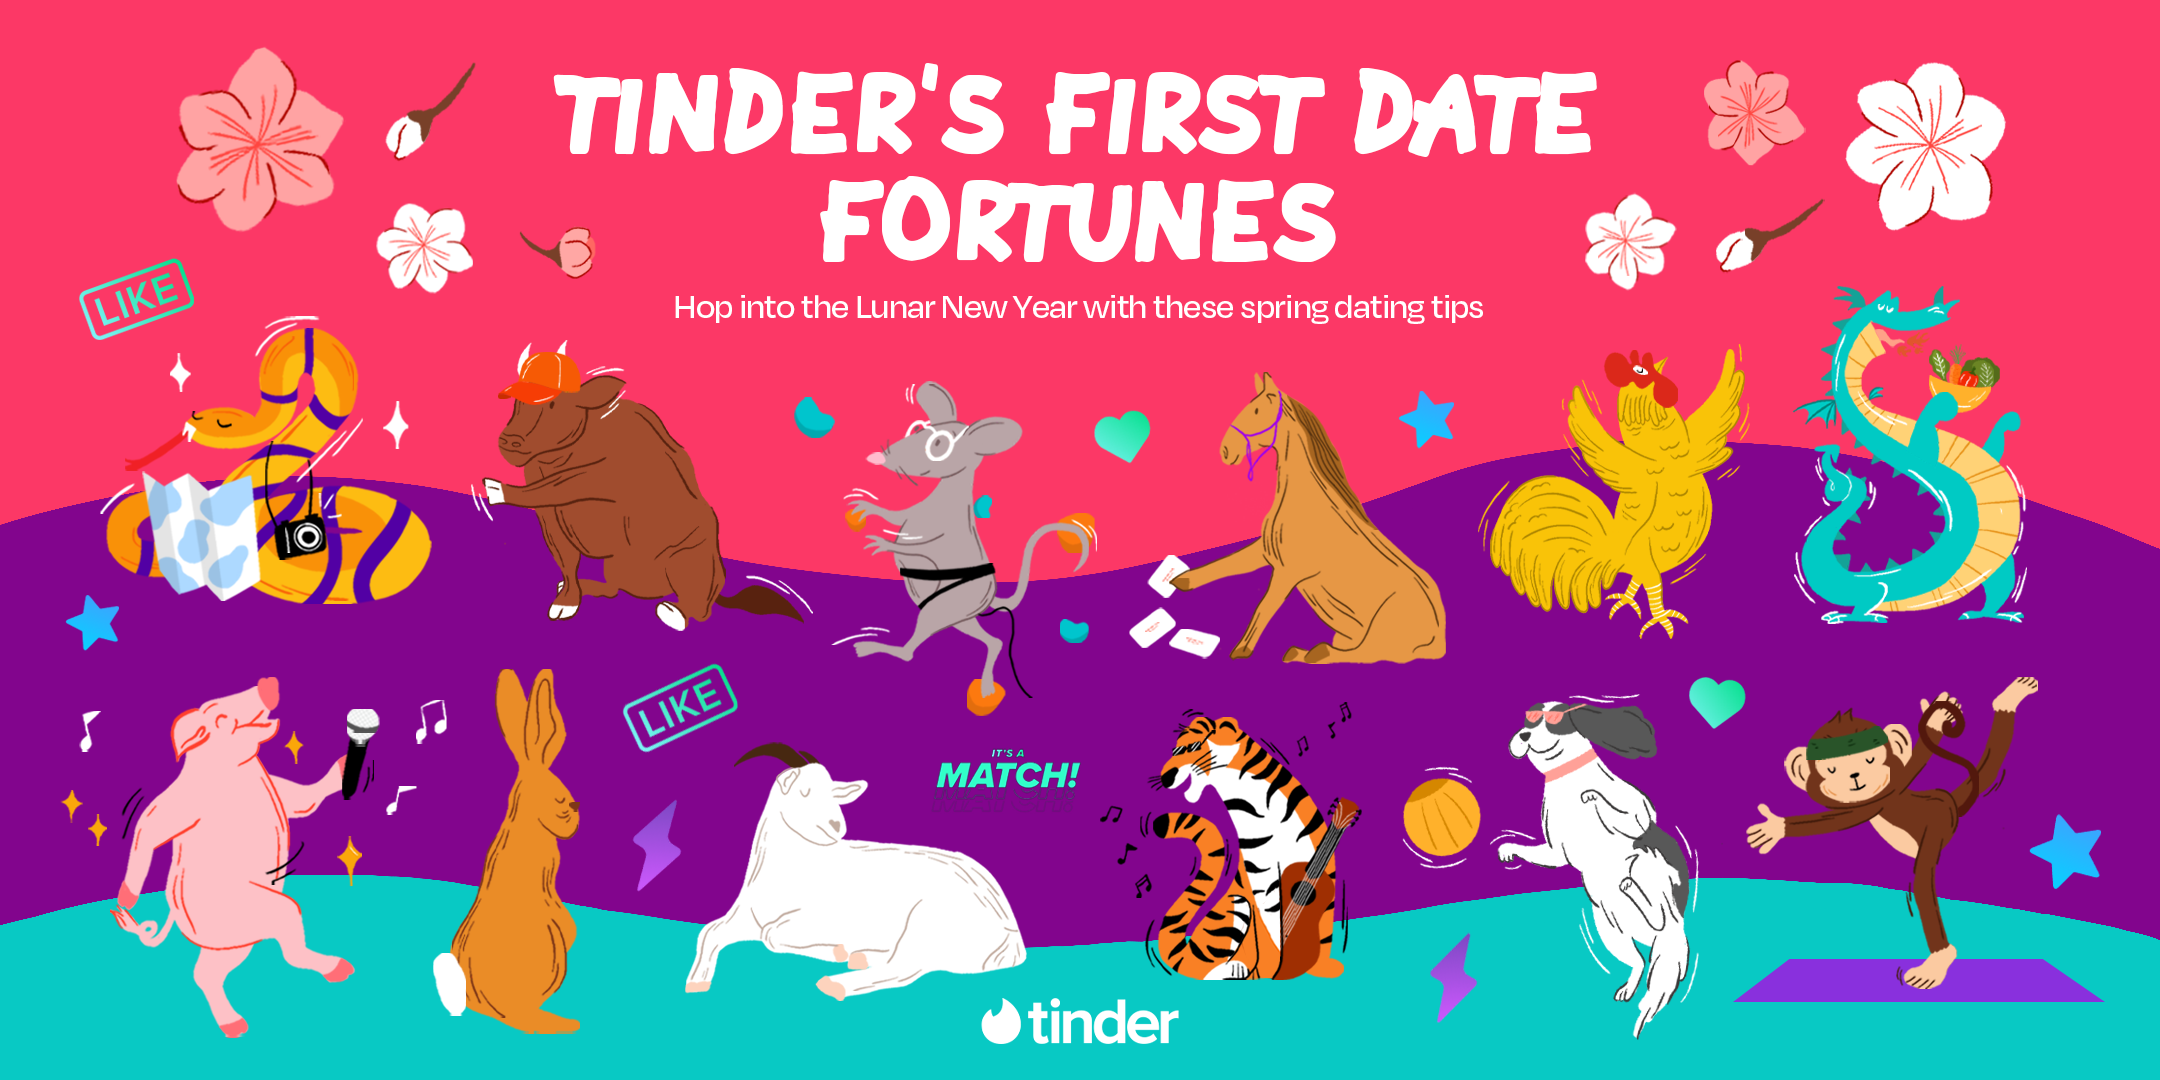 Zodiac signs and dating dynamics: Tinder's marketing approach